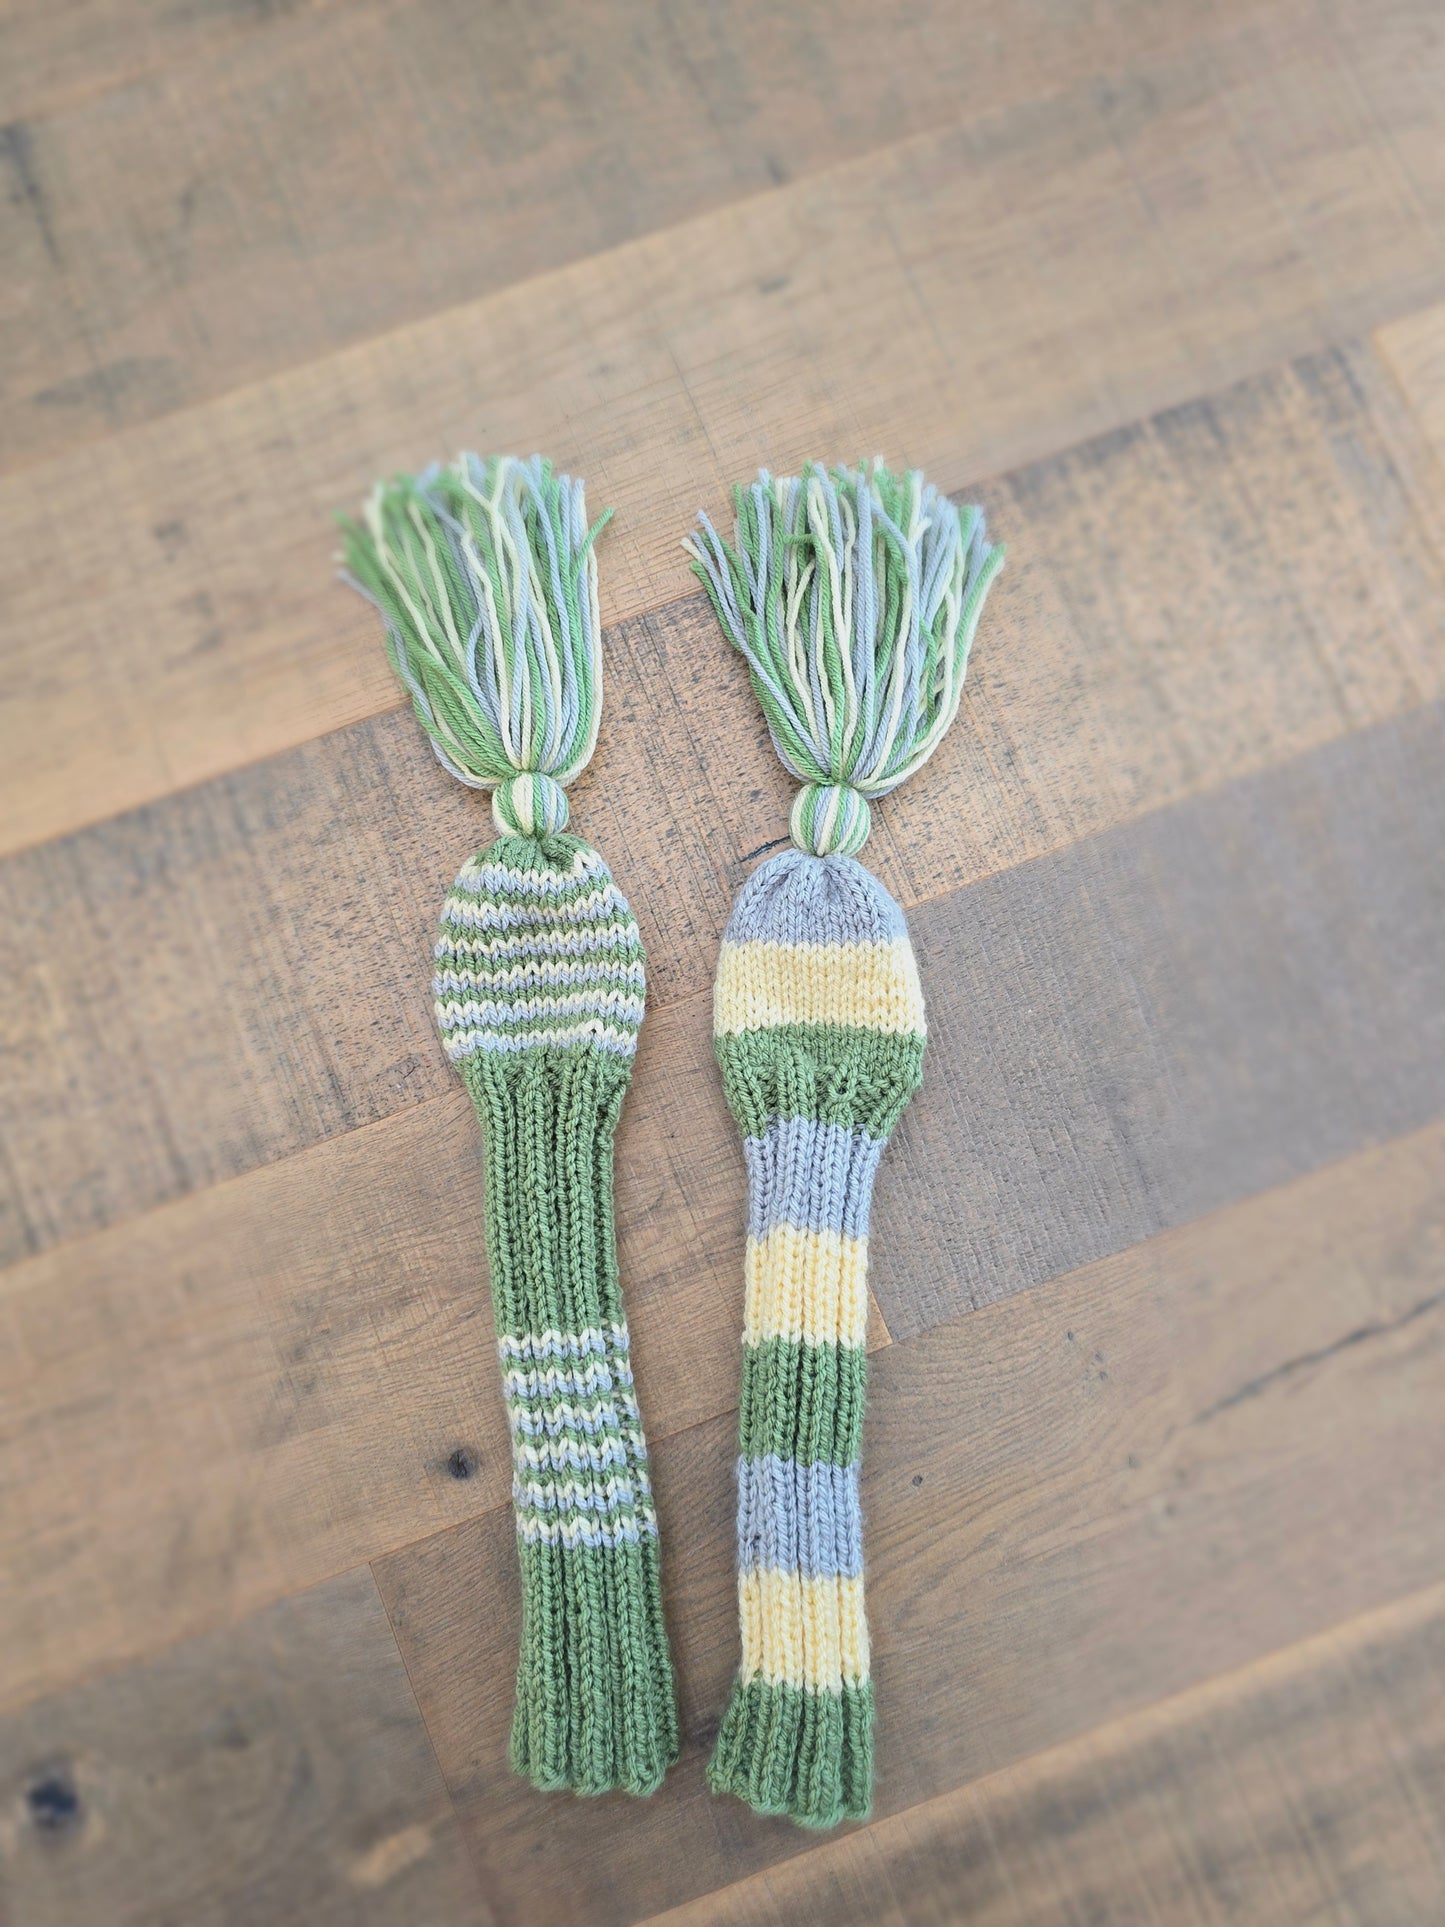 Two Golf Club Head Covers Retro-Vintage Green, Yellow & Gray with Tassels for Fairway Woods